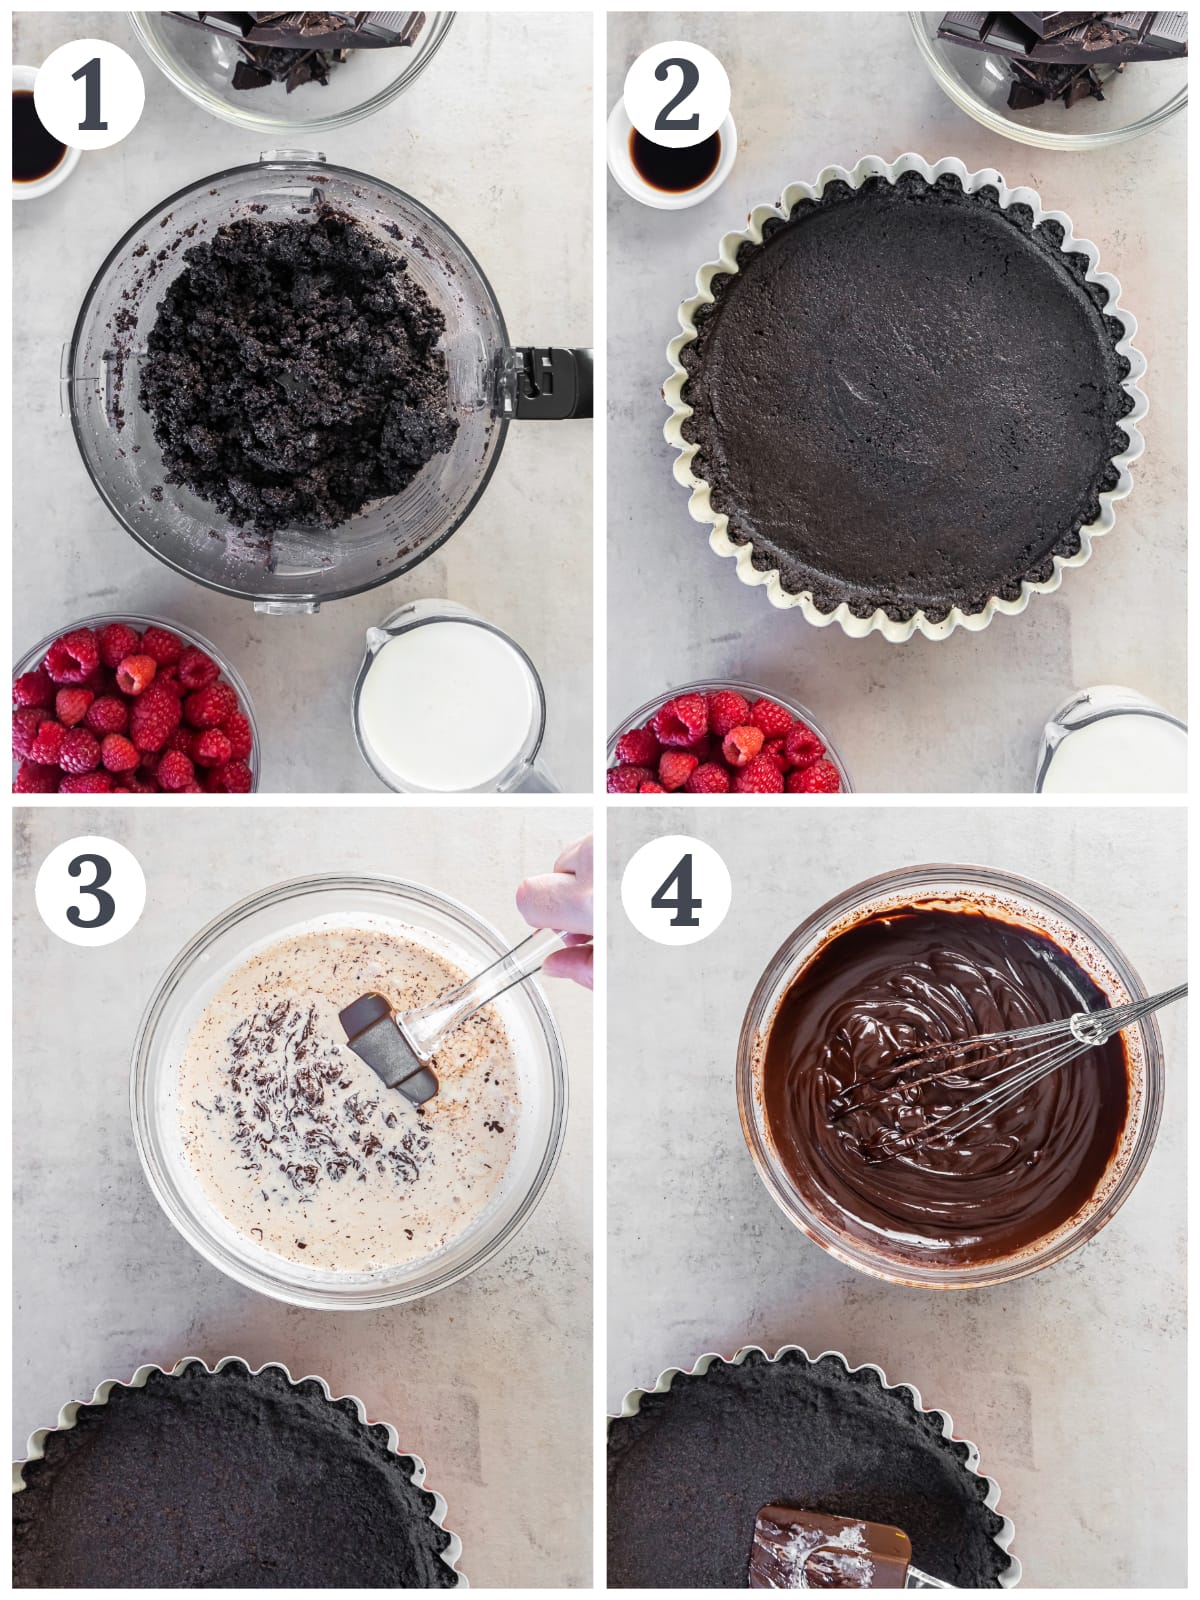 photo collage demonstrating how to make oreo cookie crust and chocolate ganache filling for chocolate raspberry tart.